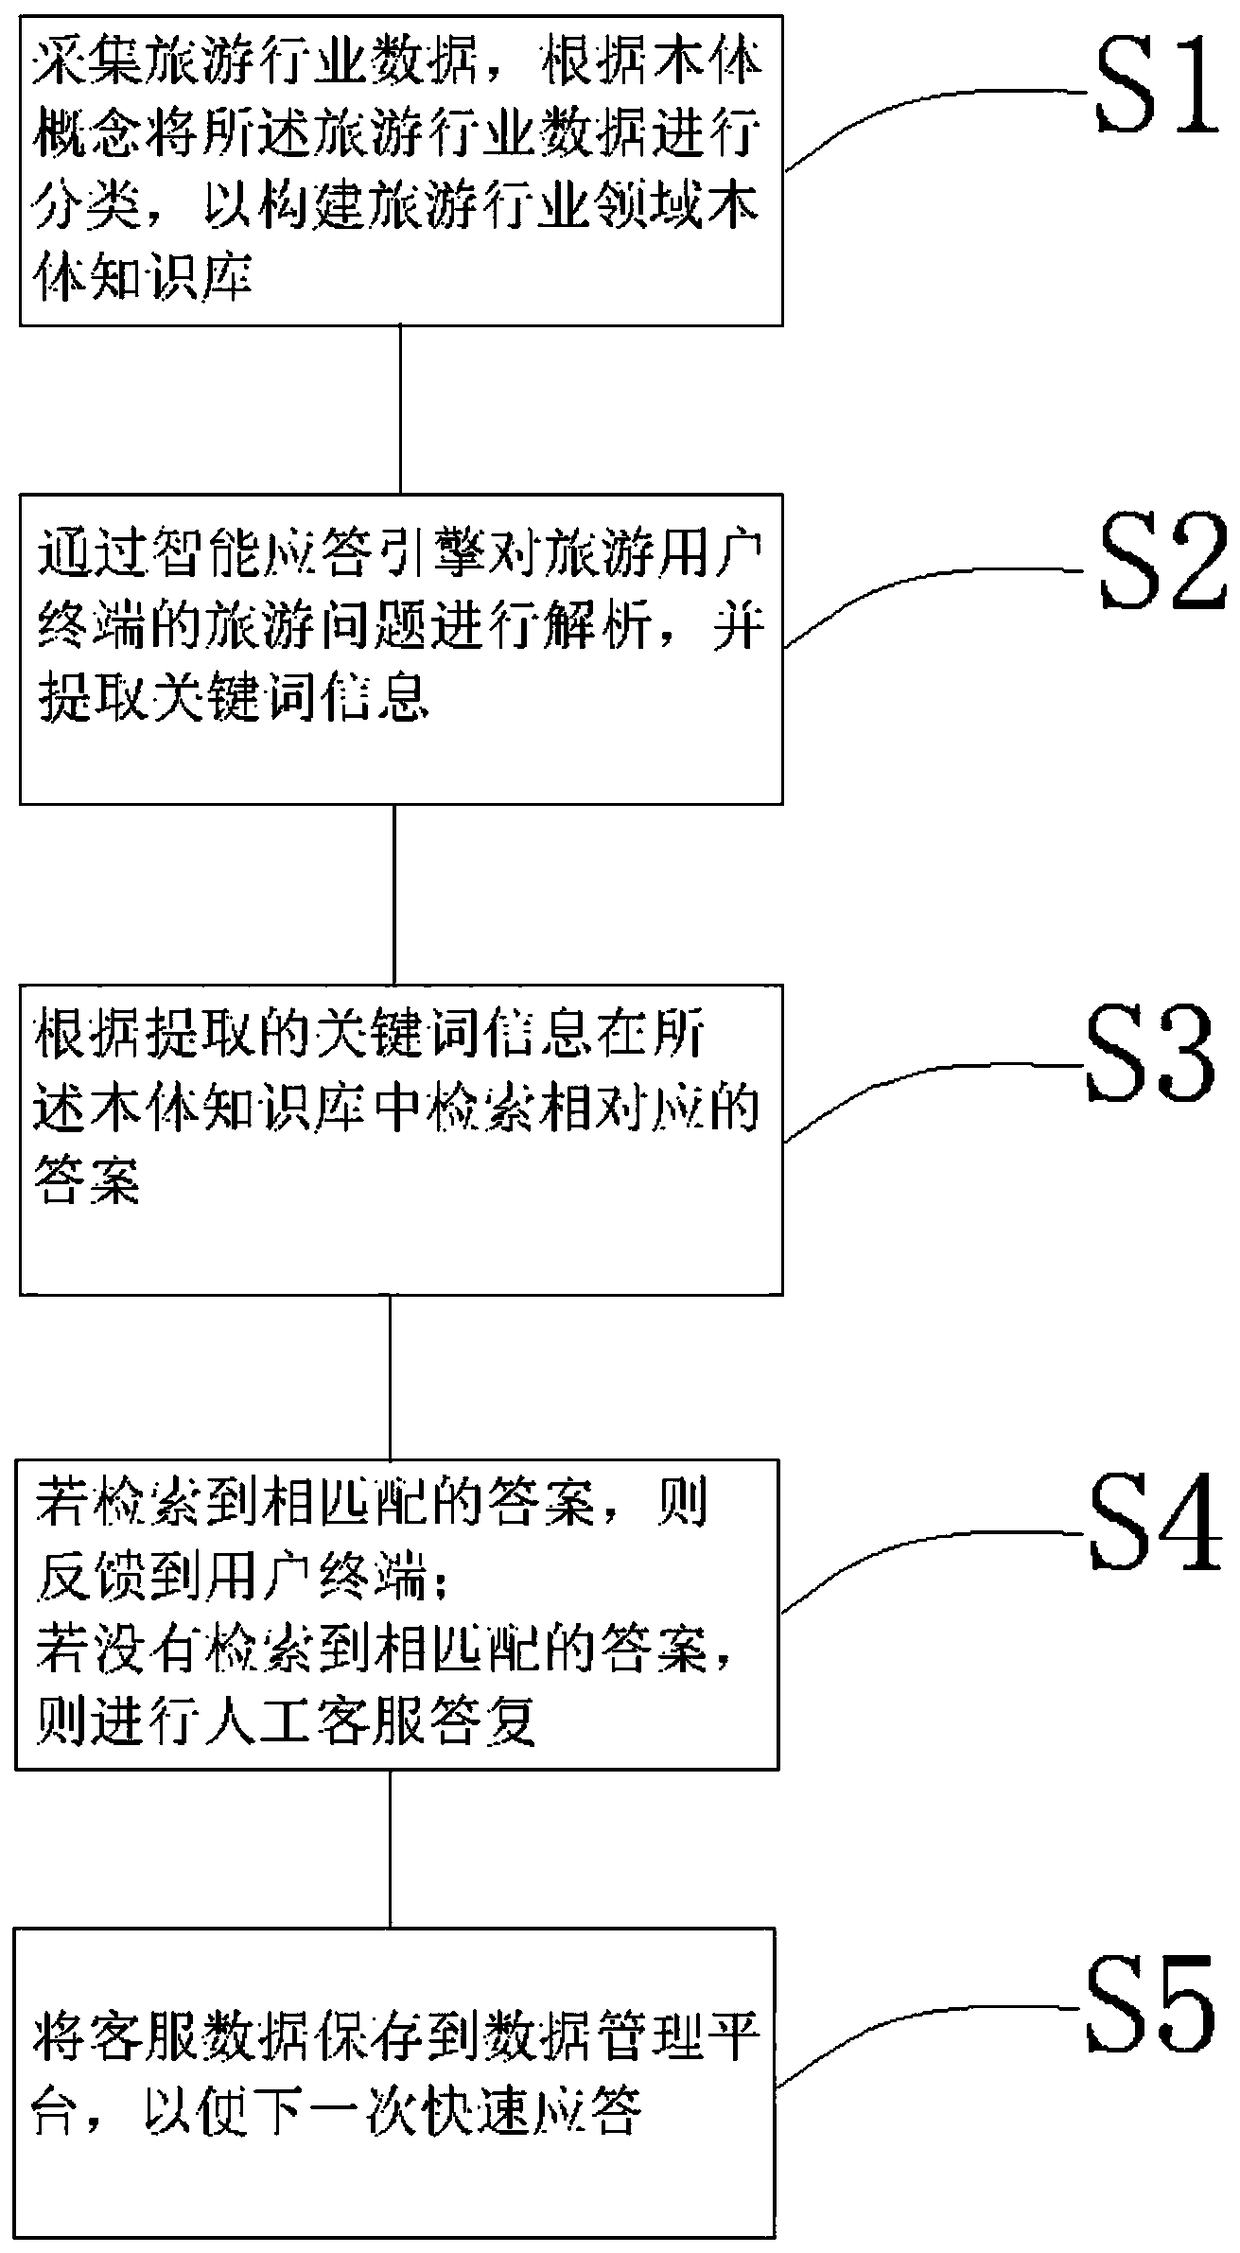 A method and system for constructing an intelligent tourist customer service system